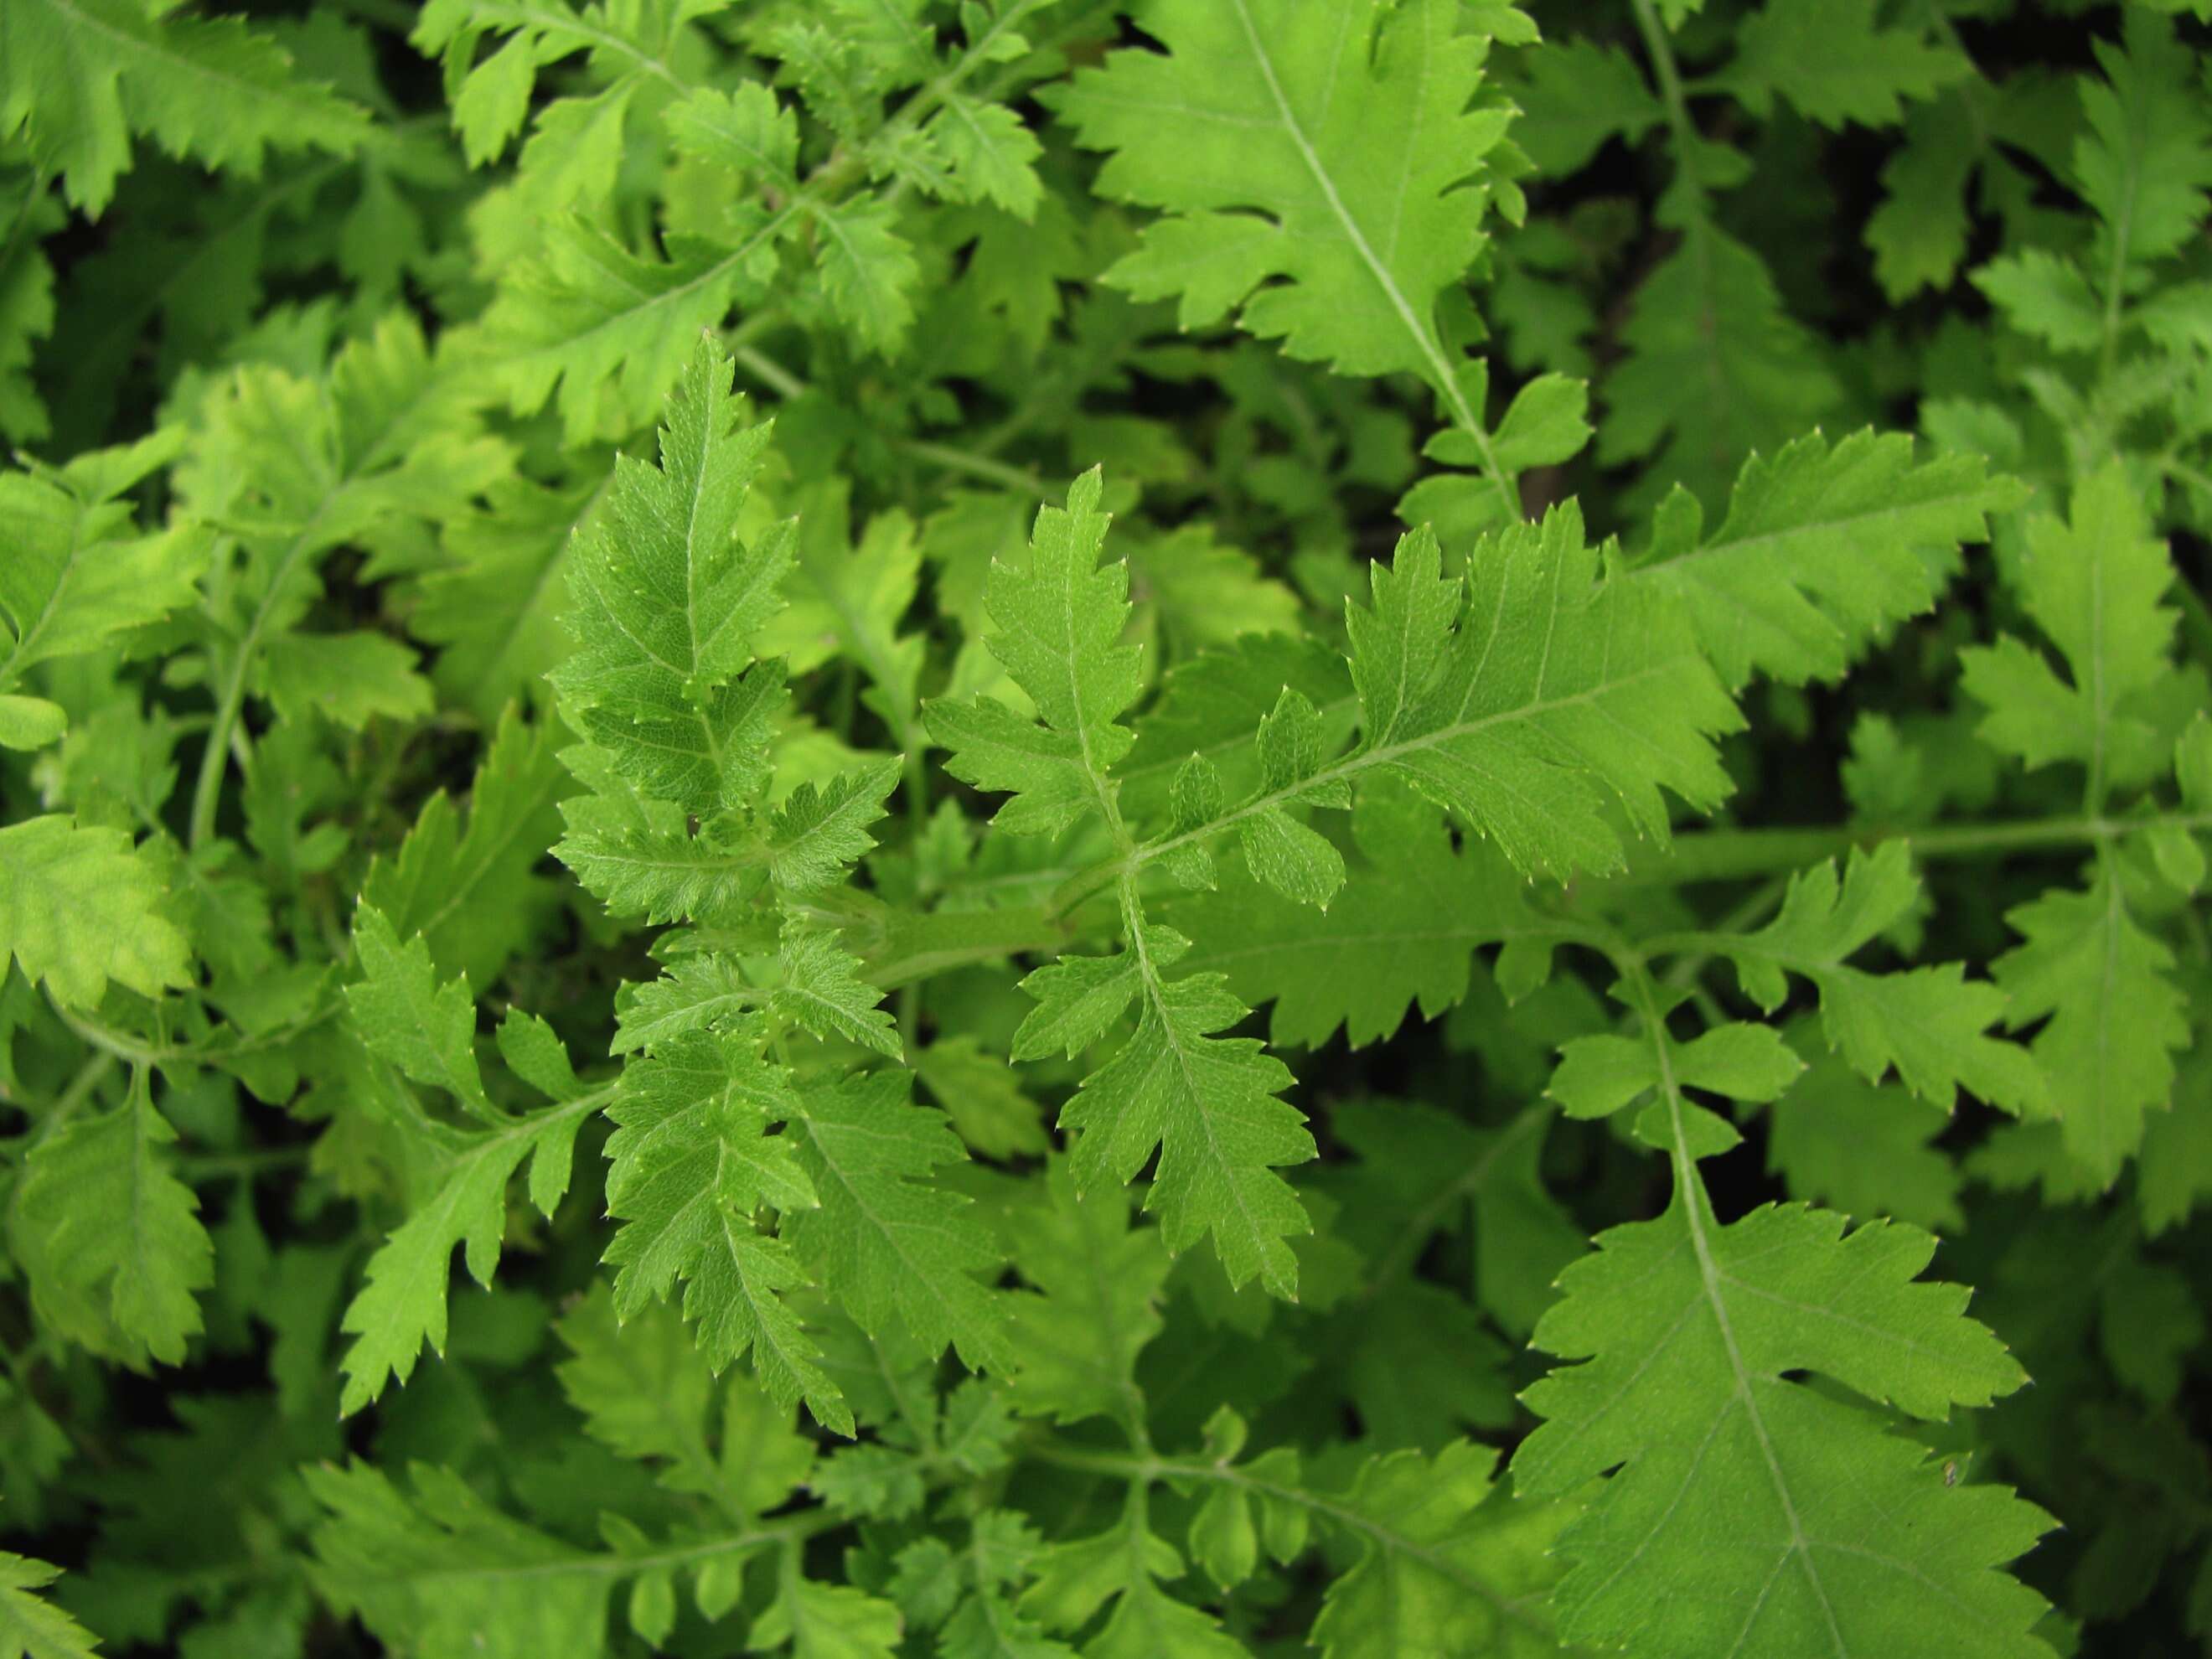 Image of Wollastonia micrantha (Nutt.) Orchard